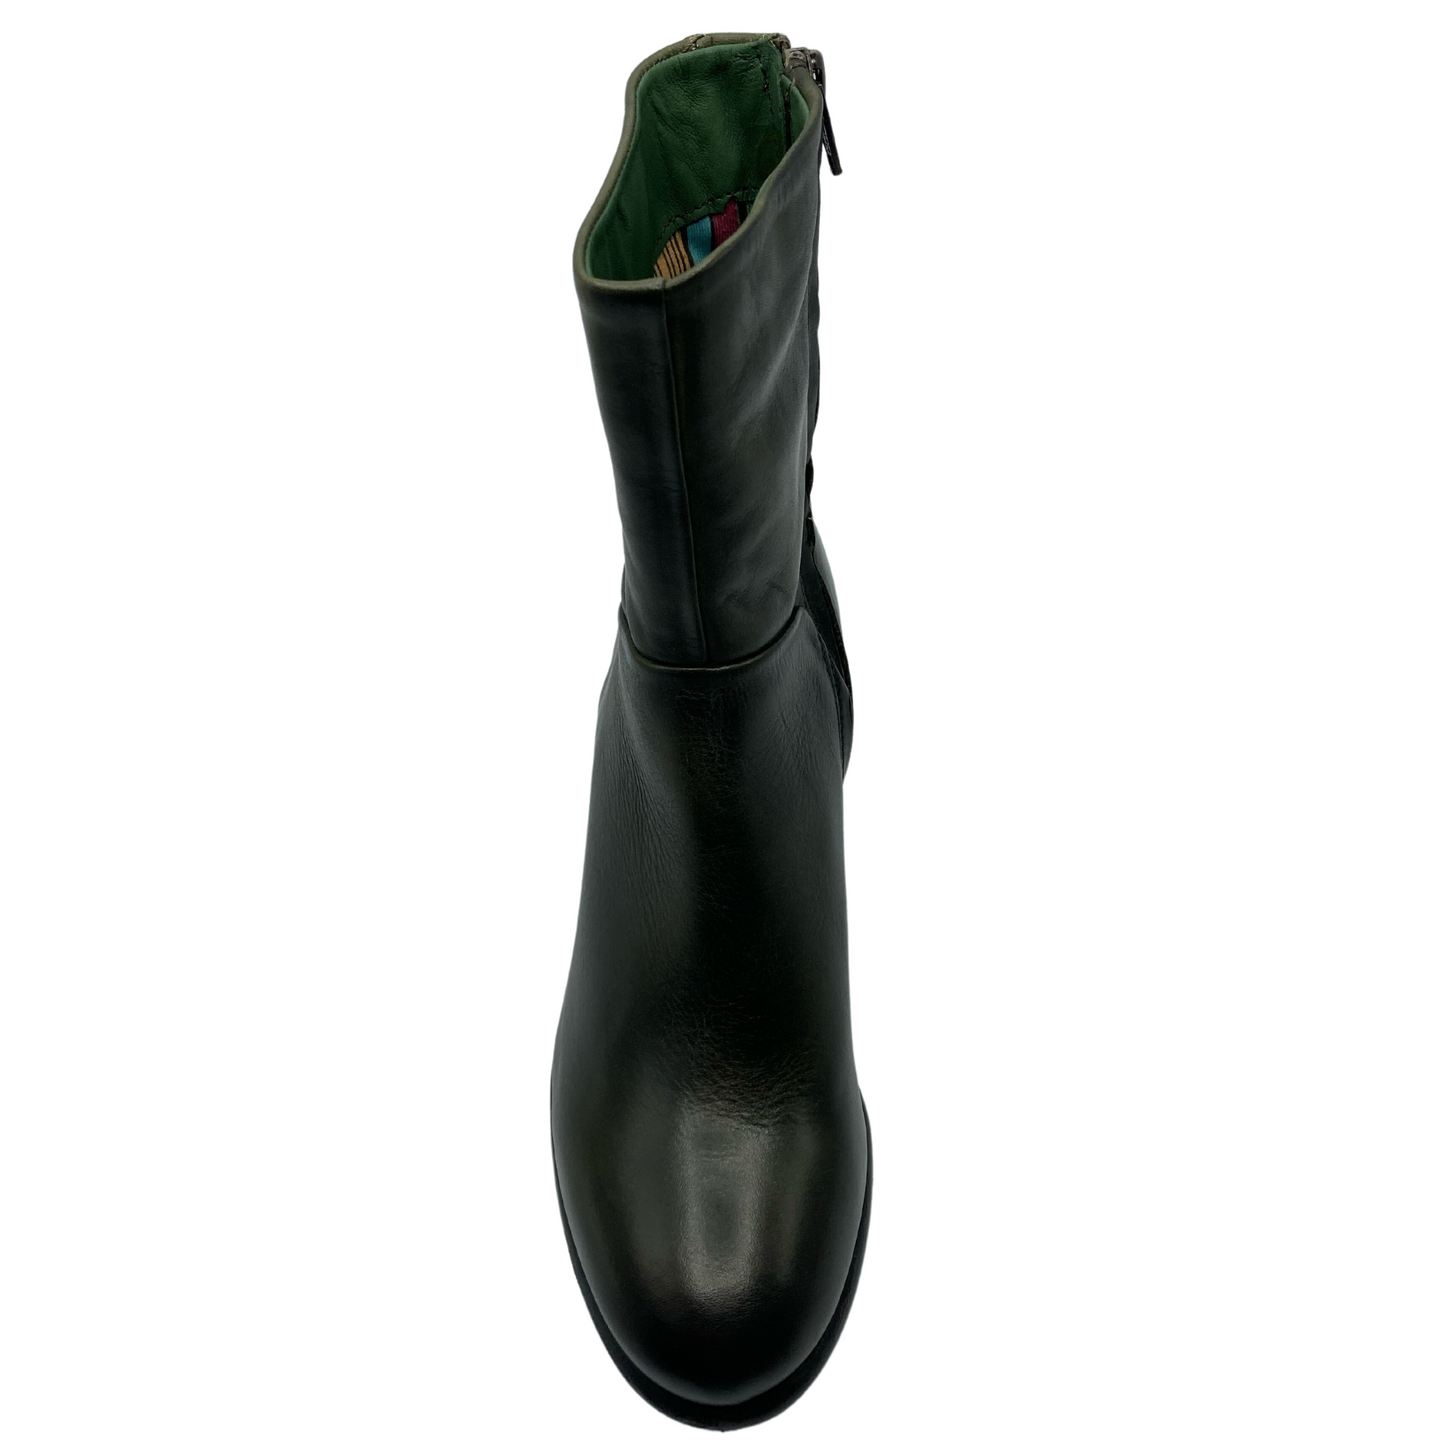 Top view of green leather short boot with textile lining and rounded toe